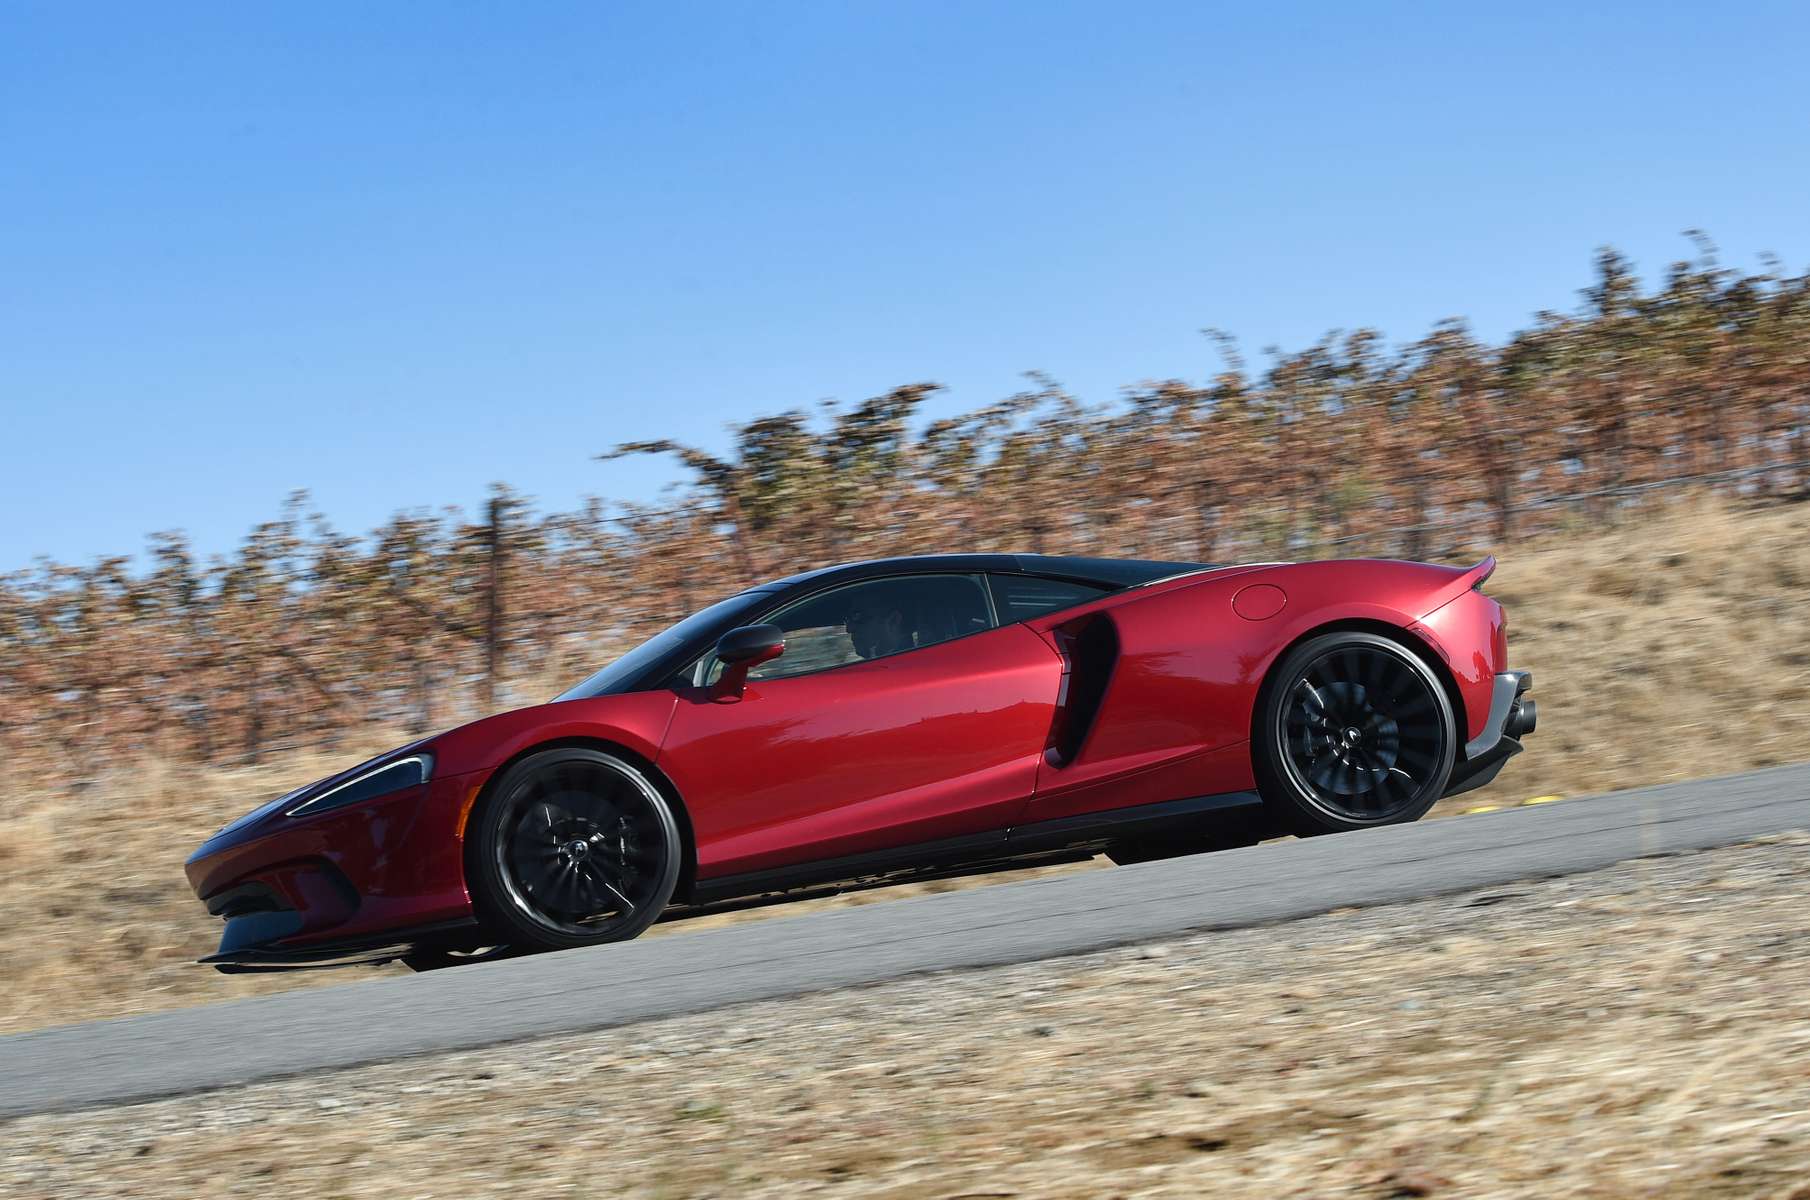 Robb Report Car of the Year in Paso Robles, CA - Nov 2020